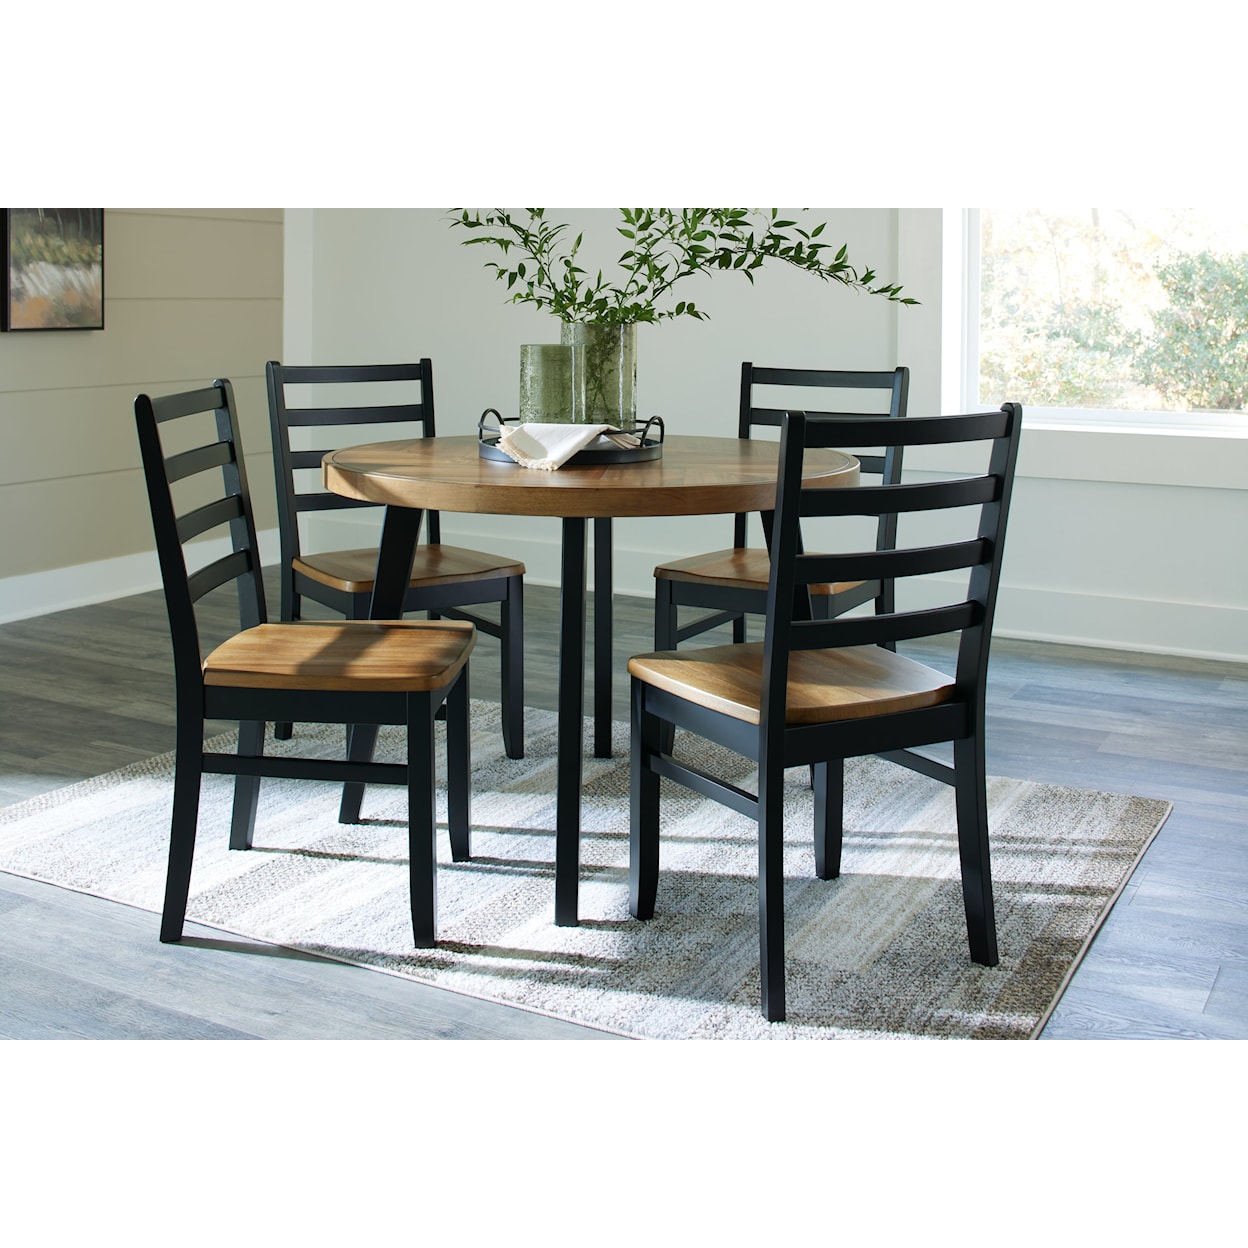 Signature Design Blondon Dining Table And 4 Chairs (Set Of 5)